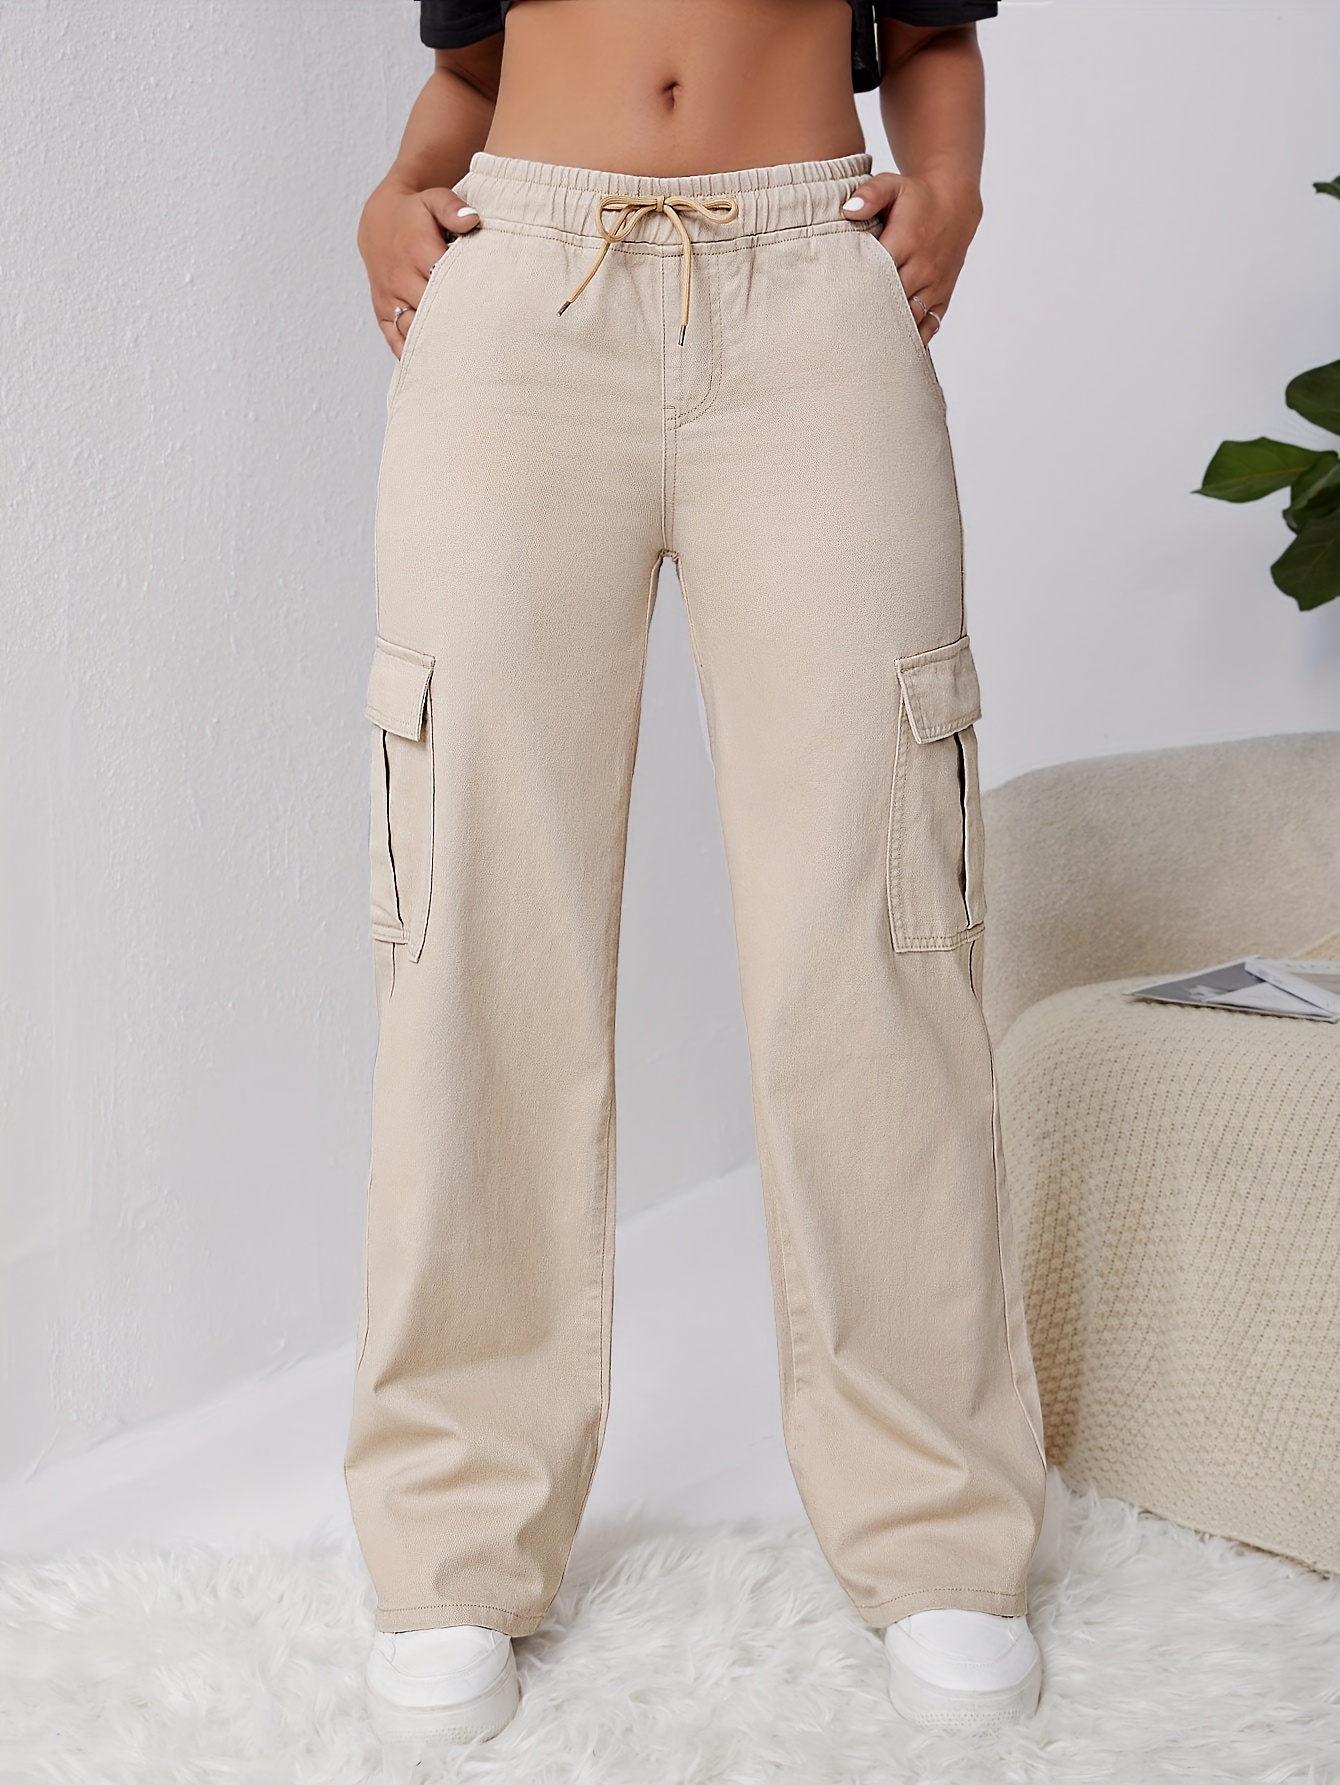 Buy Relaxed Fit Solid Denim Joggers with Drawstring Closure and Pockets